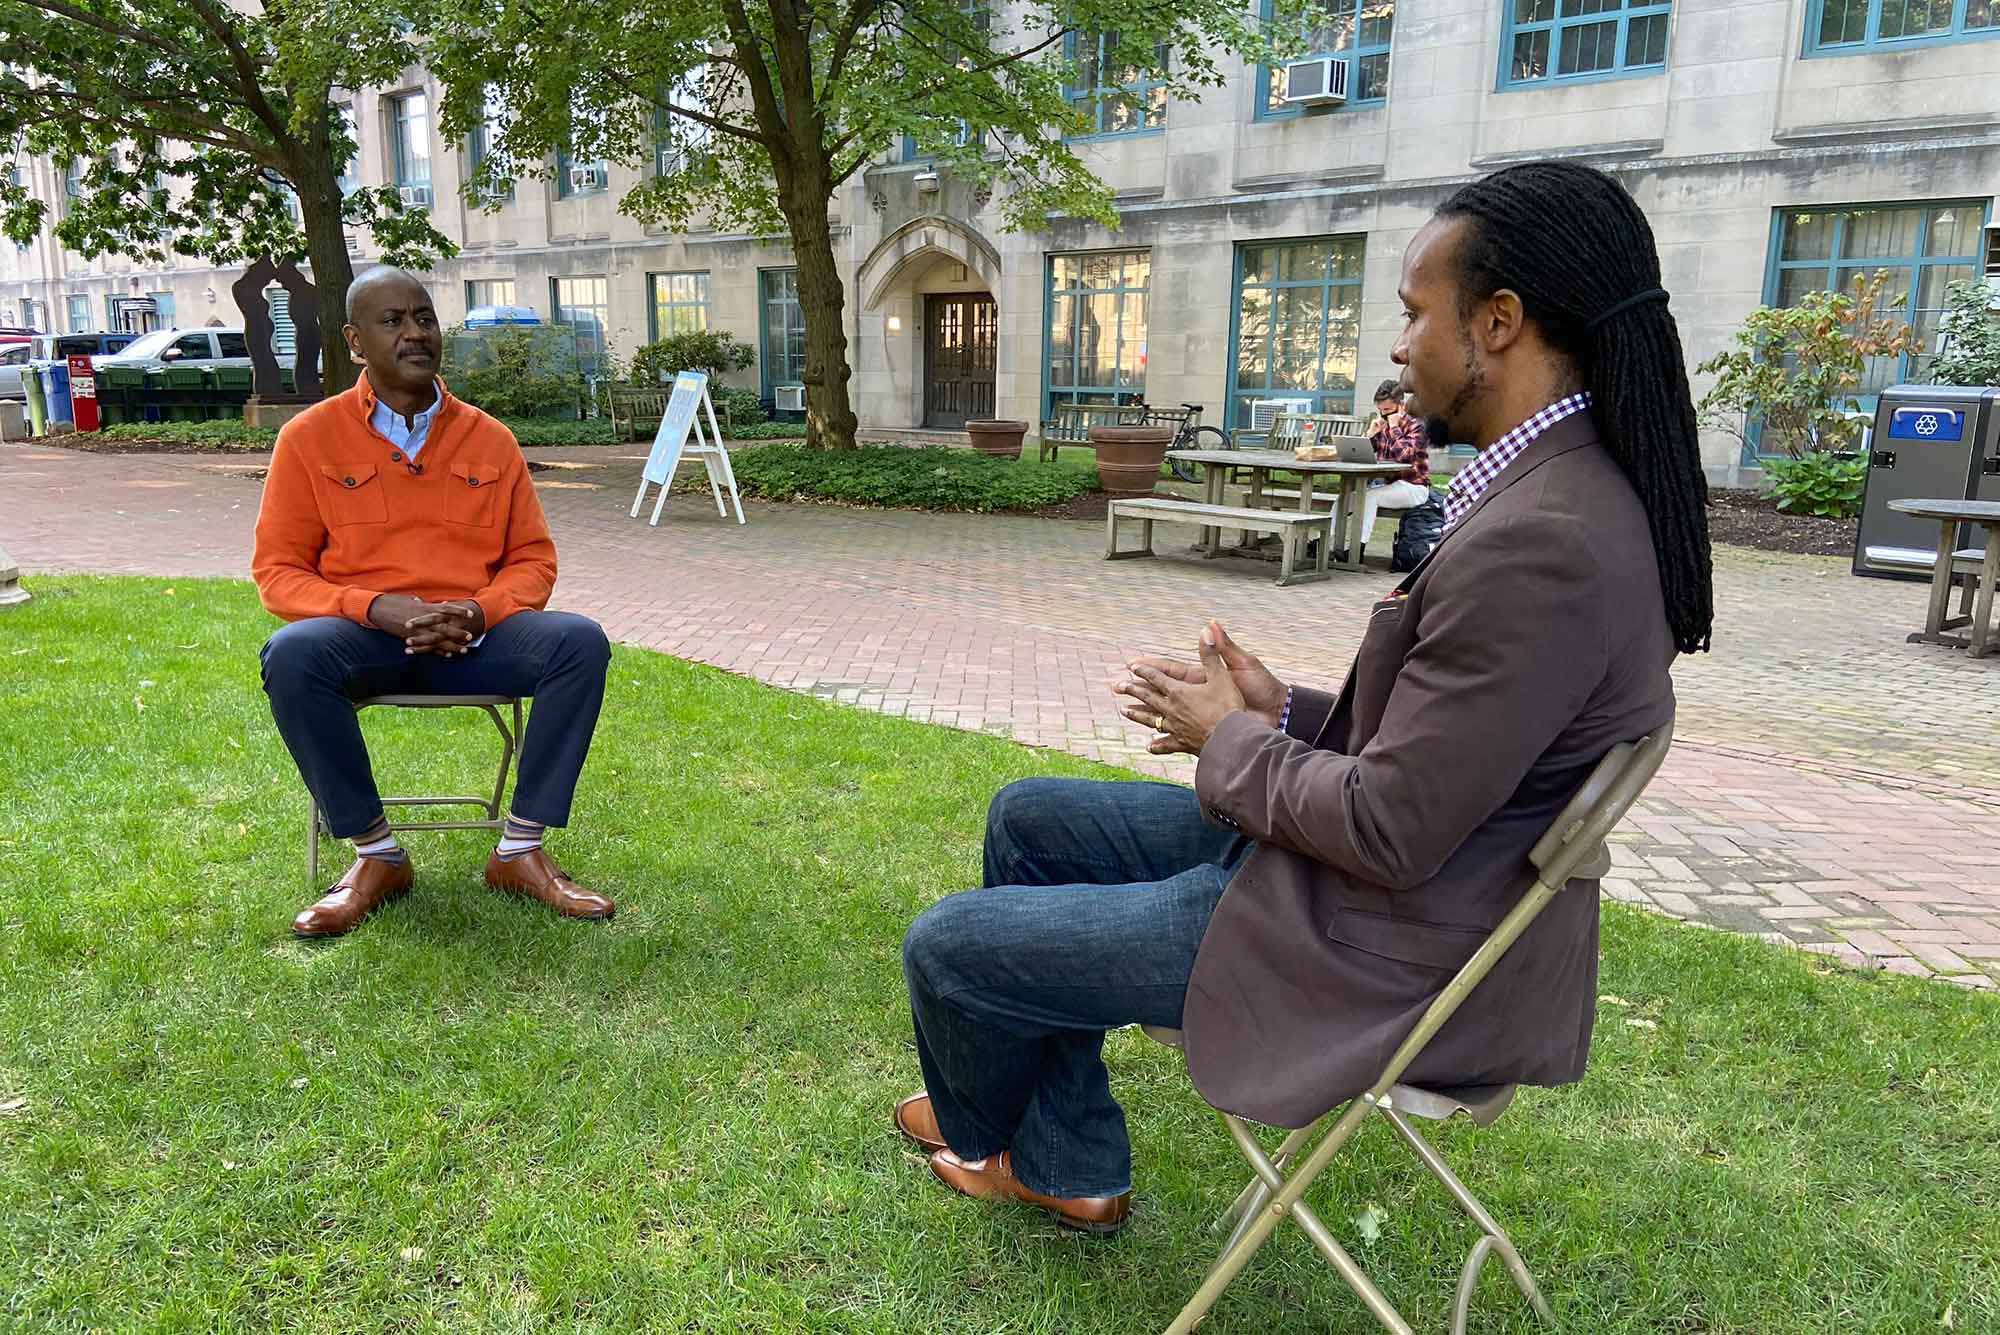 Otis Rolley III, Senior Vice President, U.S. Equity and Economic Opportunity Initiative at The Rockefeller Foundation, and Ibram X. Kendi, Director and Founder of the Boston University Center for Antiracist Research, in a discussion outdoors at Boston University. Photo courtesy of The Rockefeller Foundation